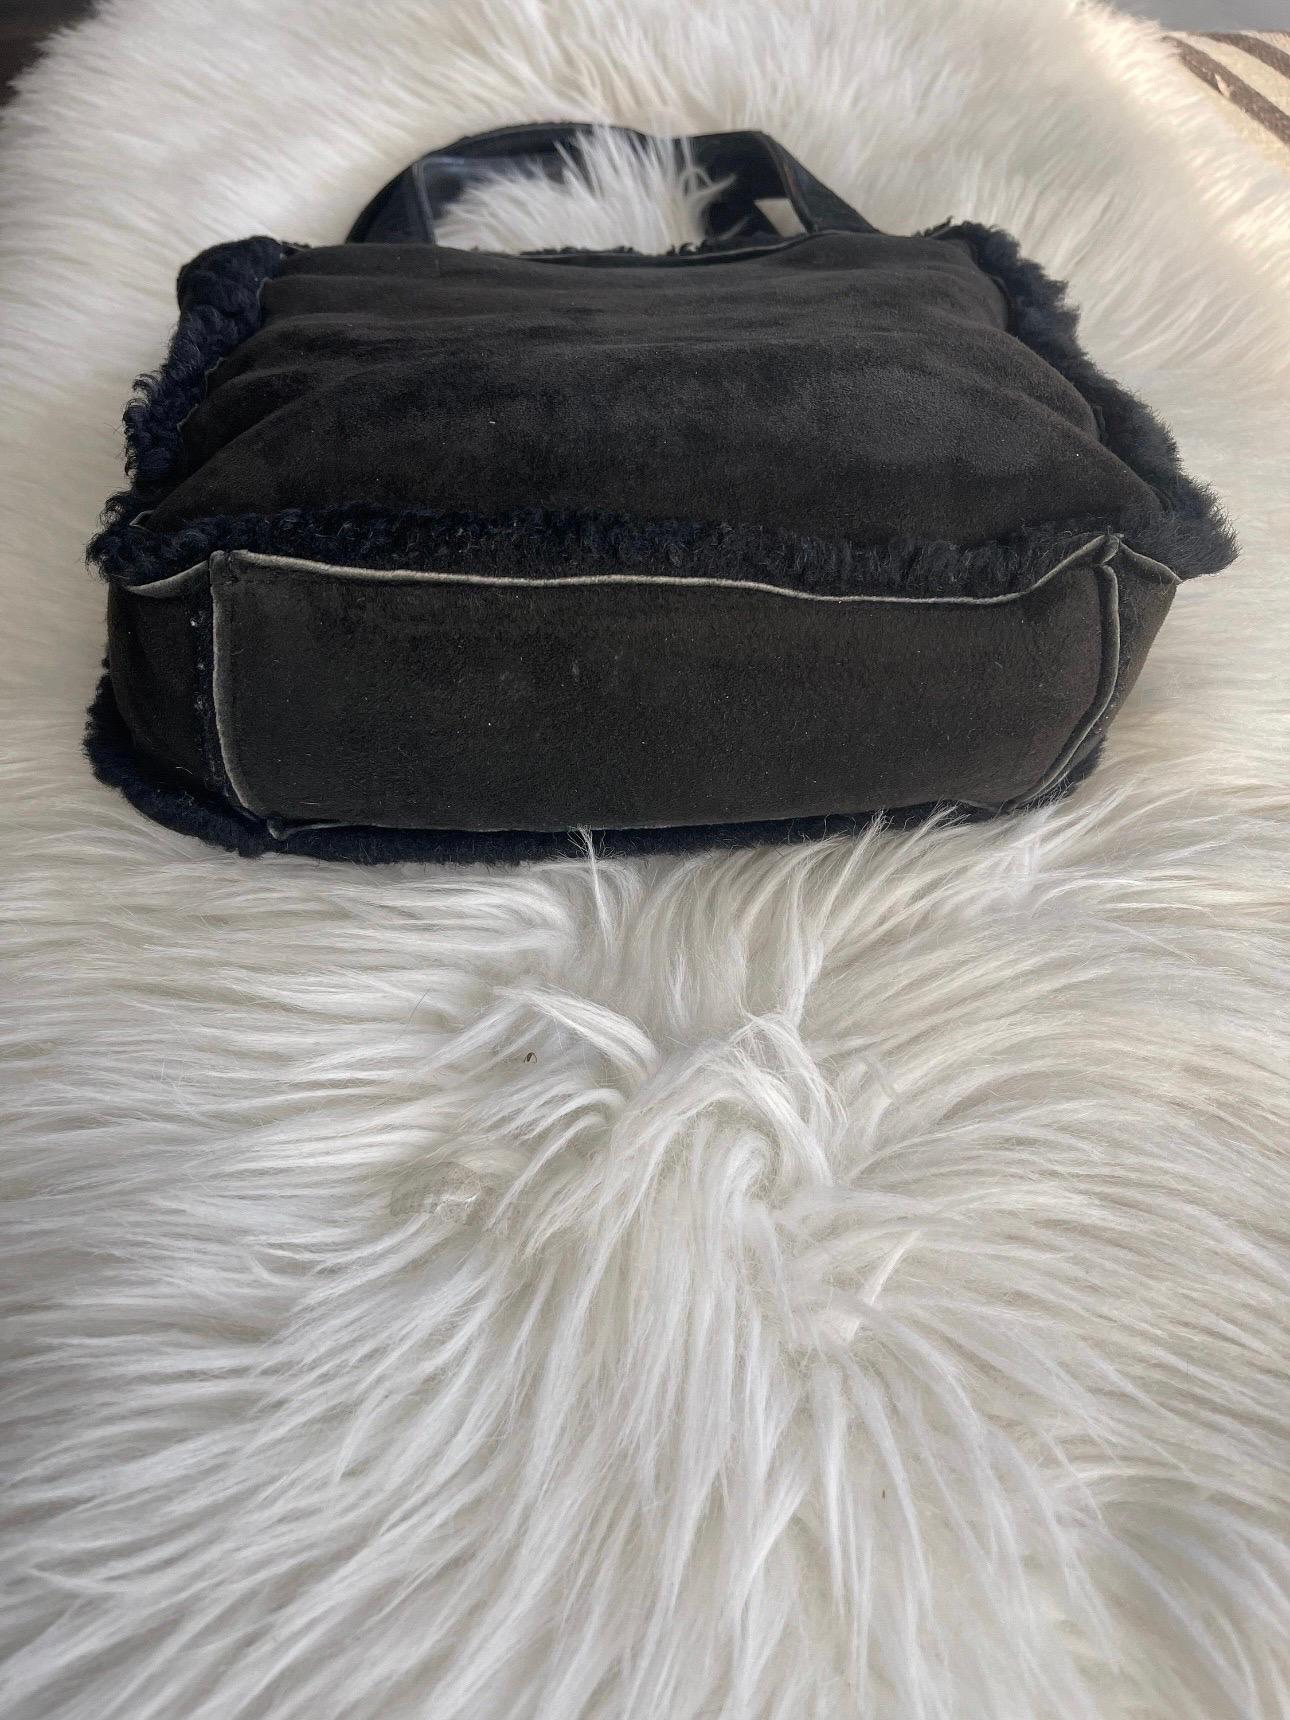 🖤Soooooo Dreamy🖤

Chic and Classic CHANEL black shearling tote

Black shearling trims the unbelievably soft black suede. Perfect size bag fits all the essentials and then some! Perfect for those cold winter days when you want to be warm and chic!